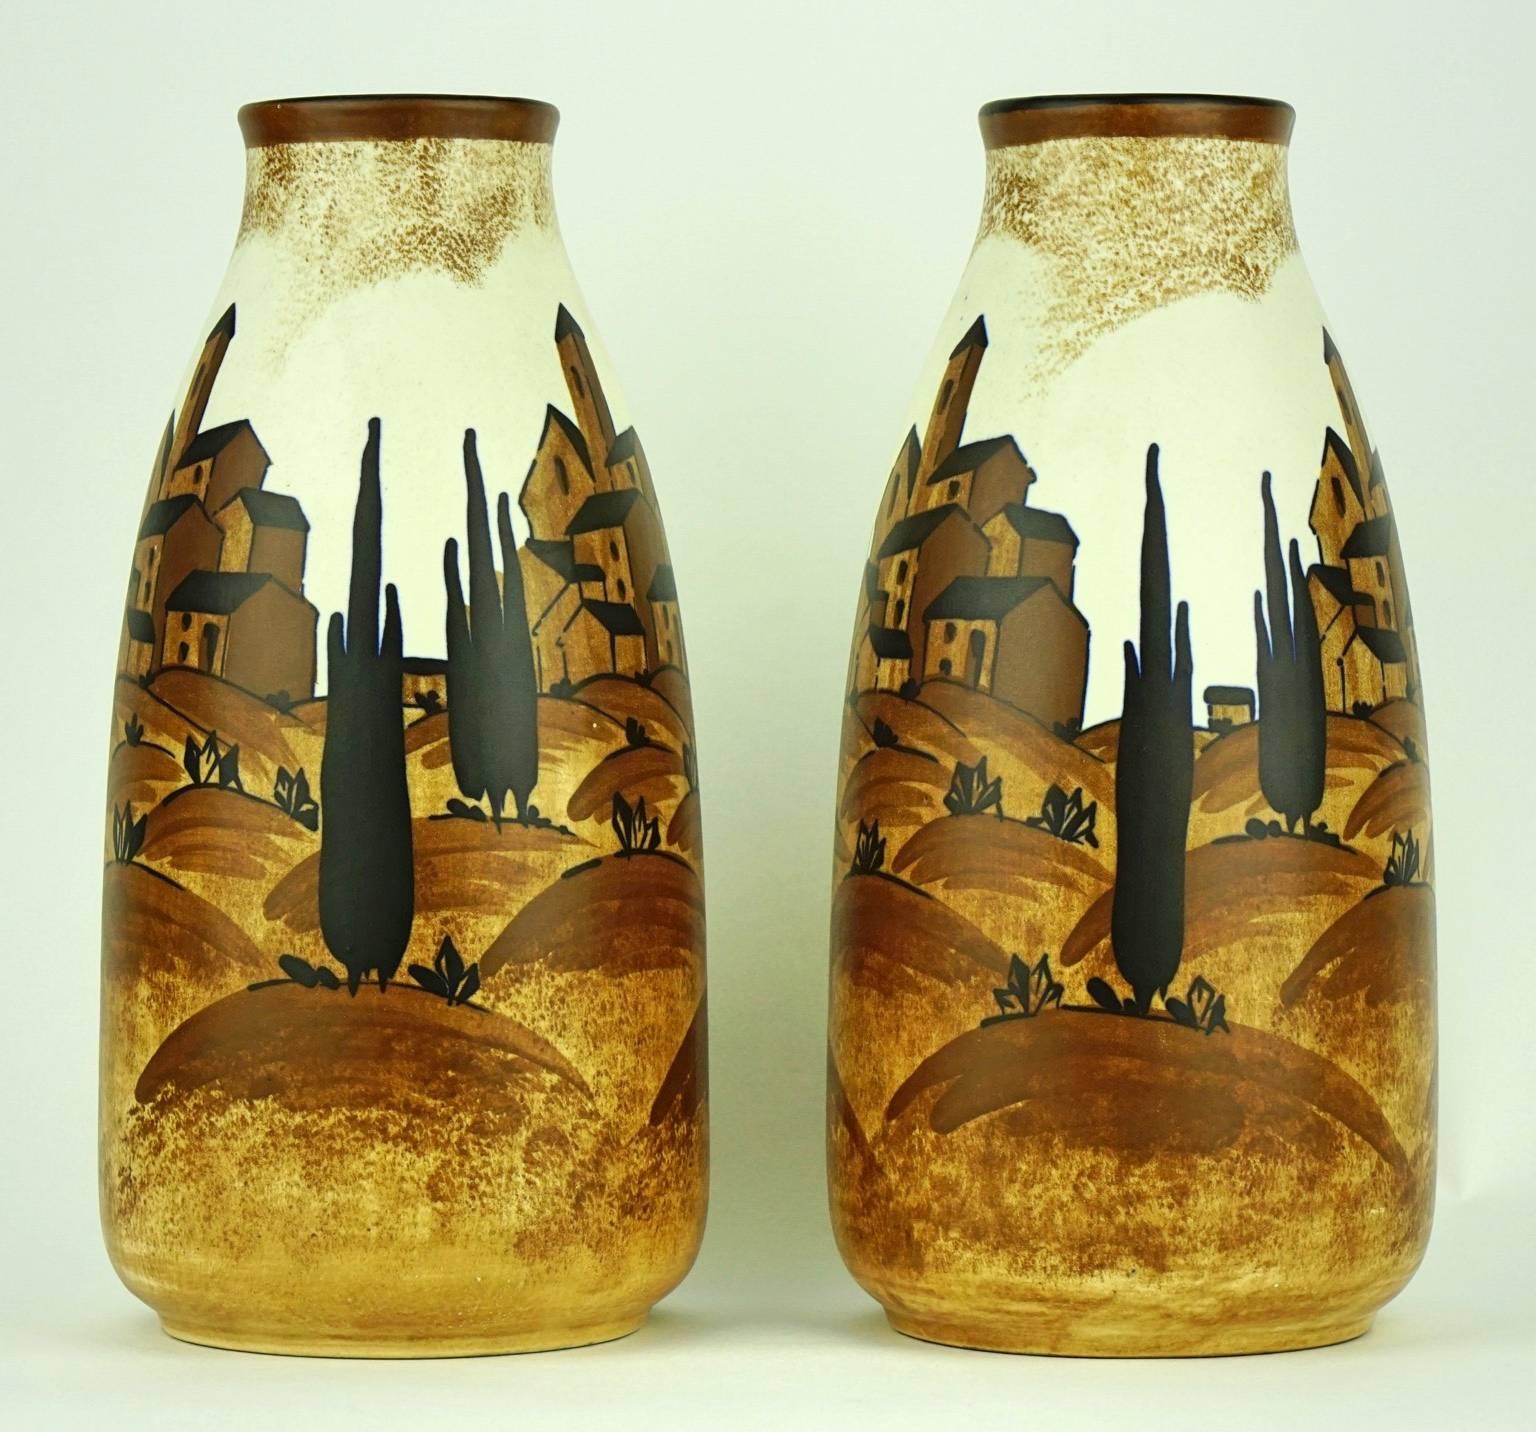 This pair of rare Art Deco matte vases with a Mediterranean landscape in ochre hues is an example of an Art Deco style which avoids the showiness of colours and ensures the connection between material and design.

It is signed C. Catteau with ink,